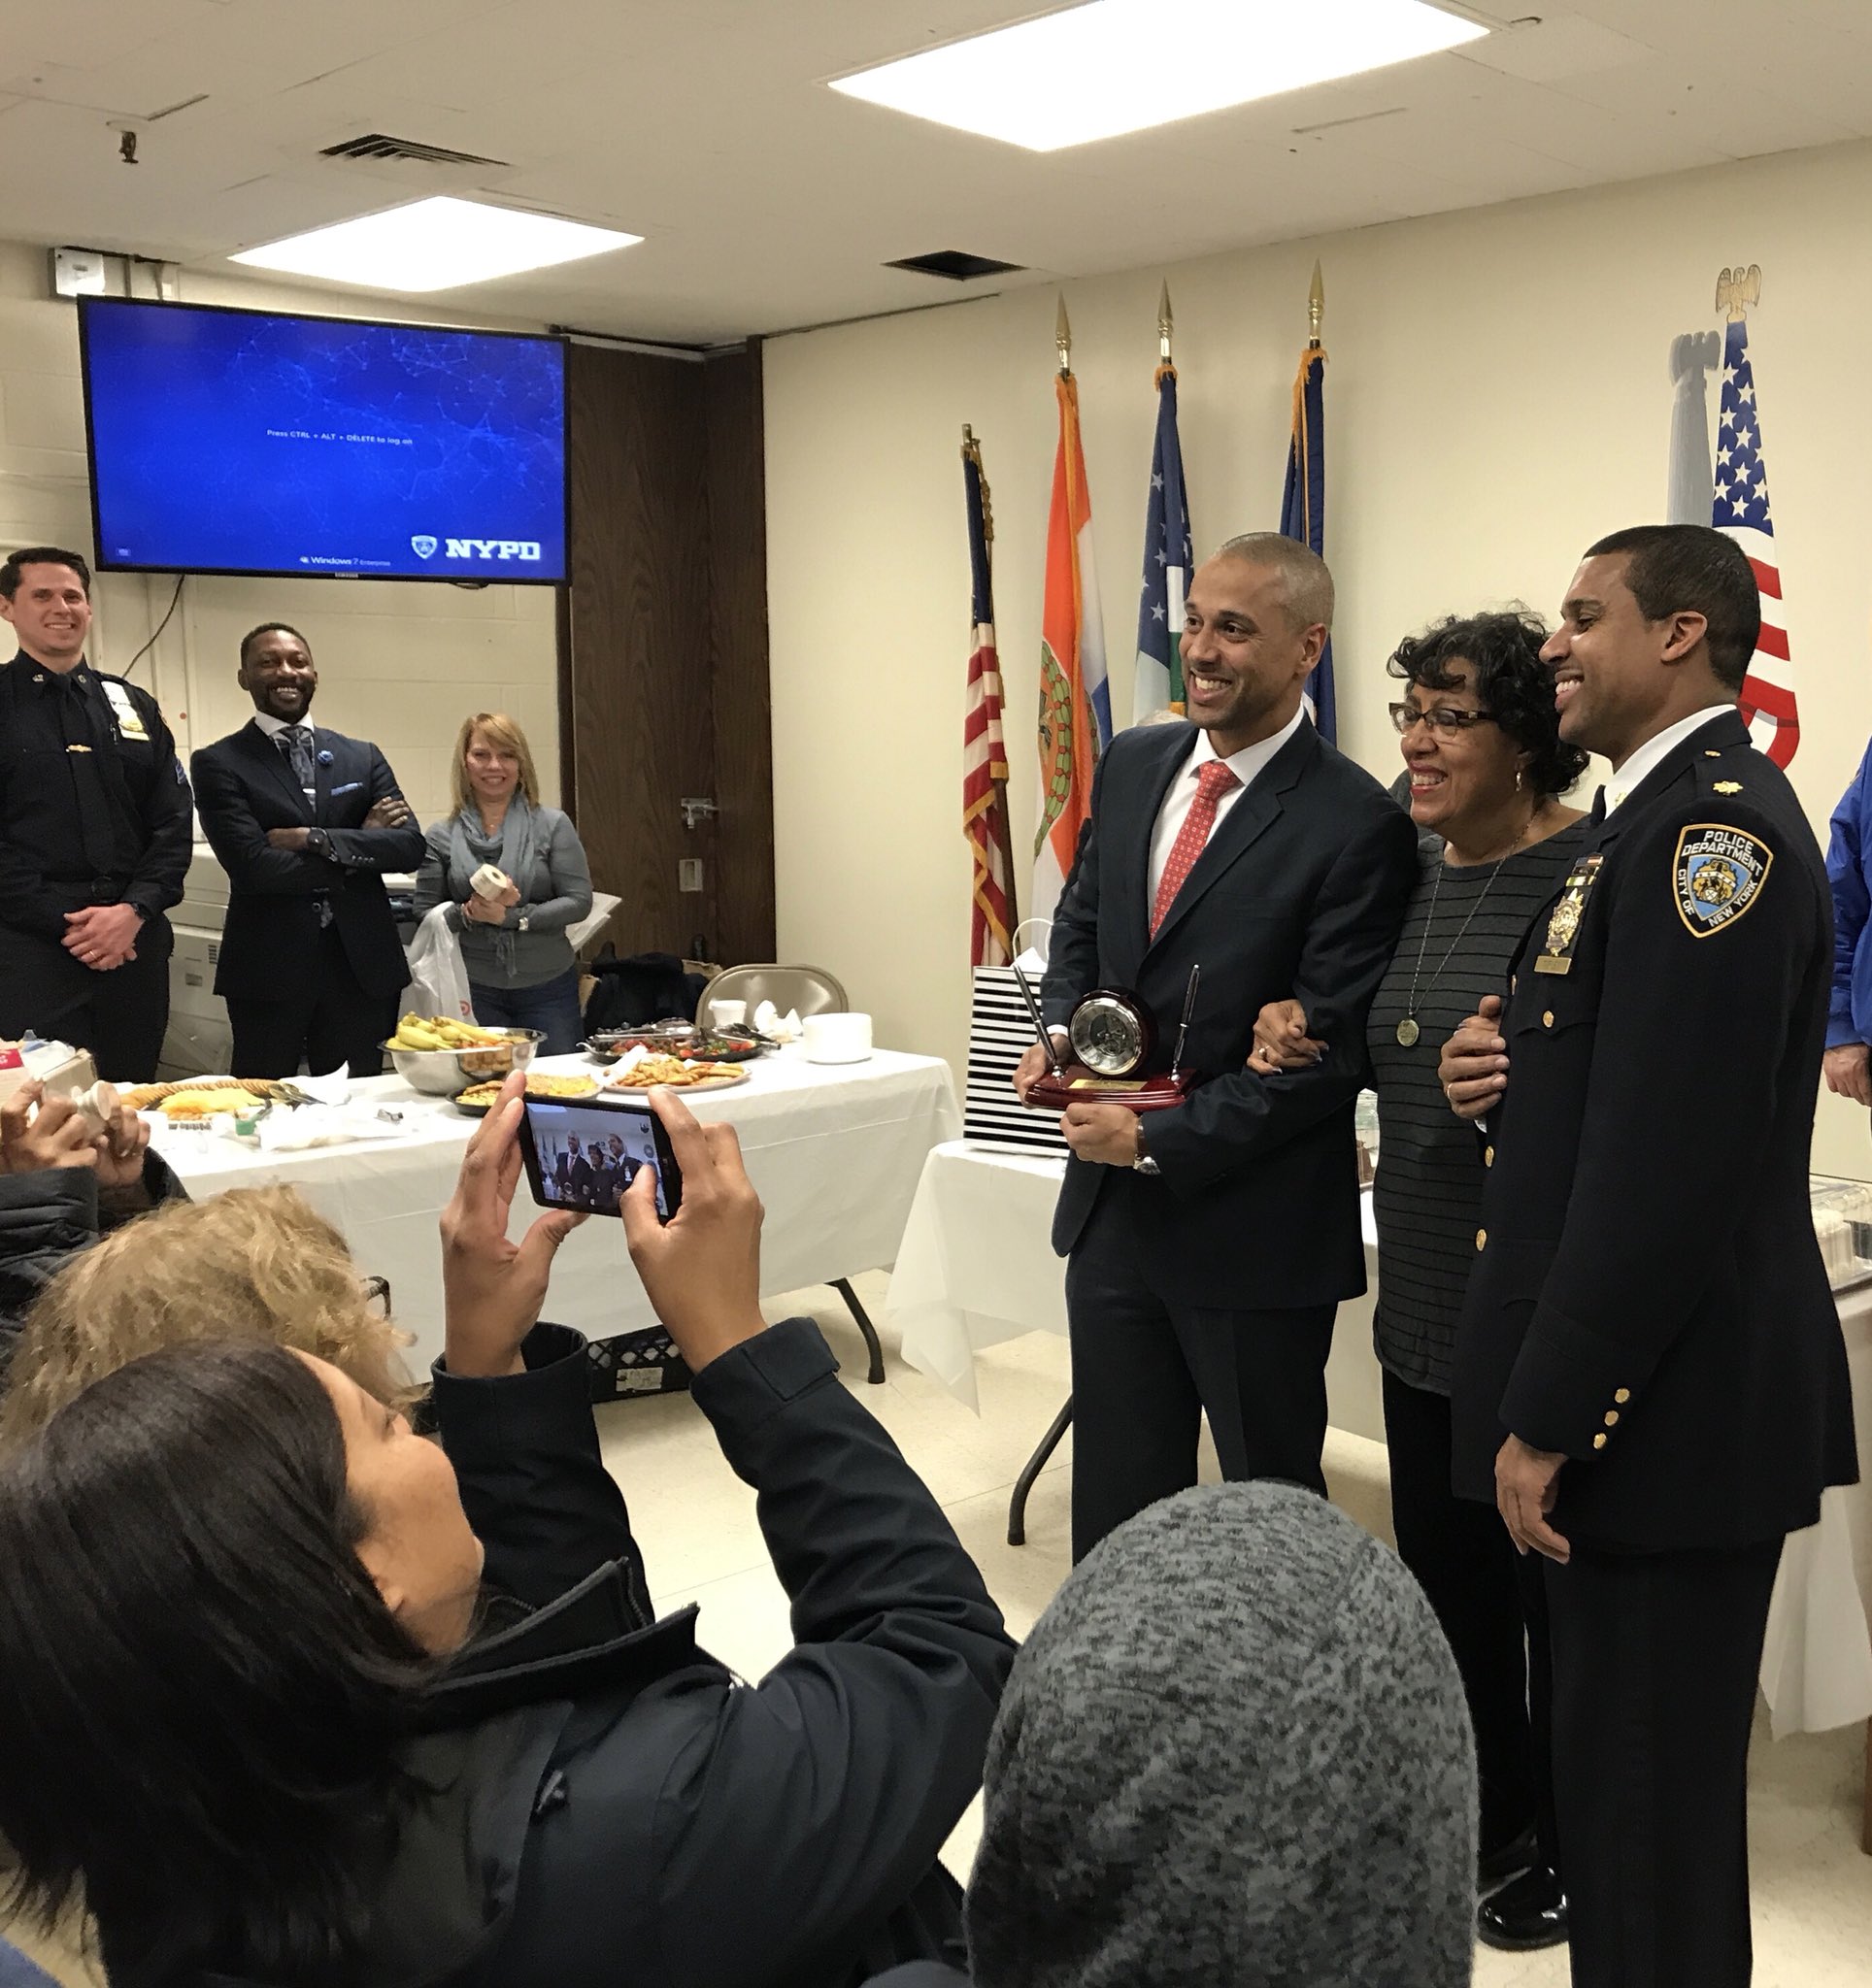 Nypd 43rd Precinct On Twitter Happeningnow Our 43rd Precinct Community Council Meeting Is Full Of Surprises Tonight As Our Former Commanding Officer And Newly Promoted Assistant Chief Pichardo Stops By To Say - nypd meeting center roblox